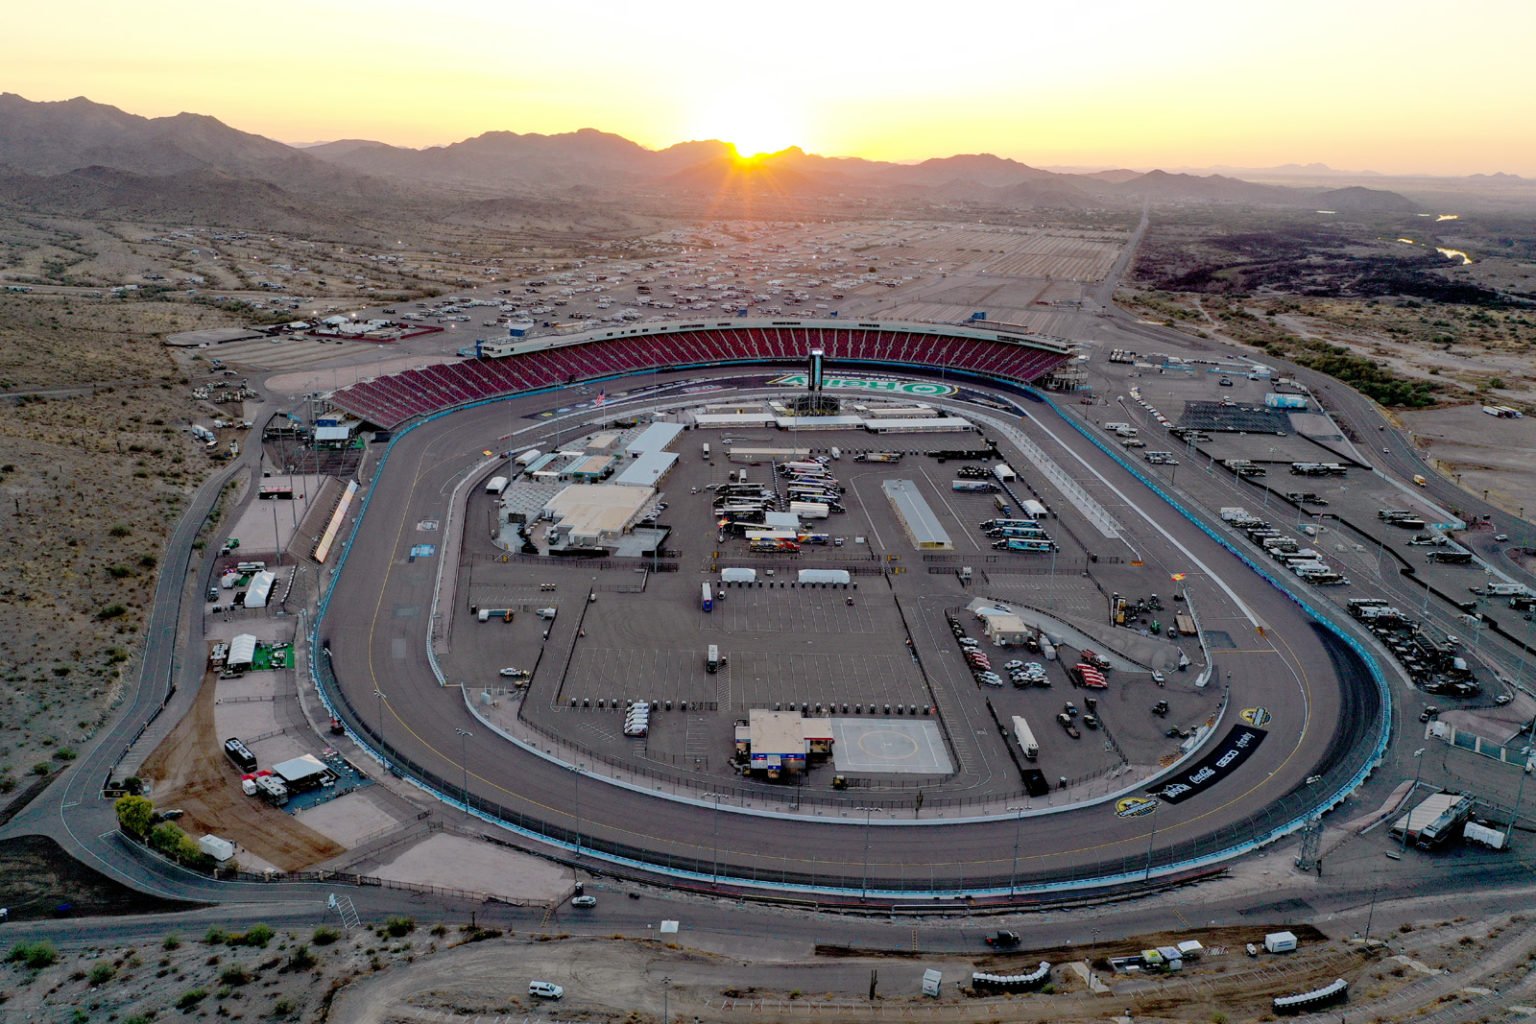 Phoenix Raceway Overview, Stats and Schedule for NASCAR Championship